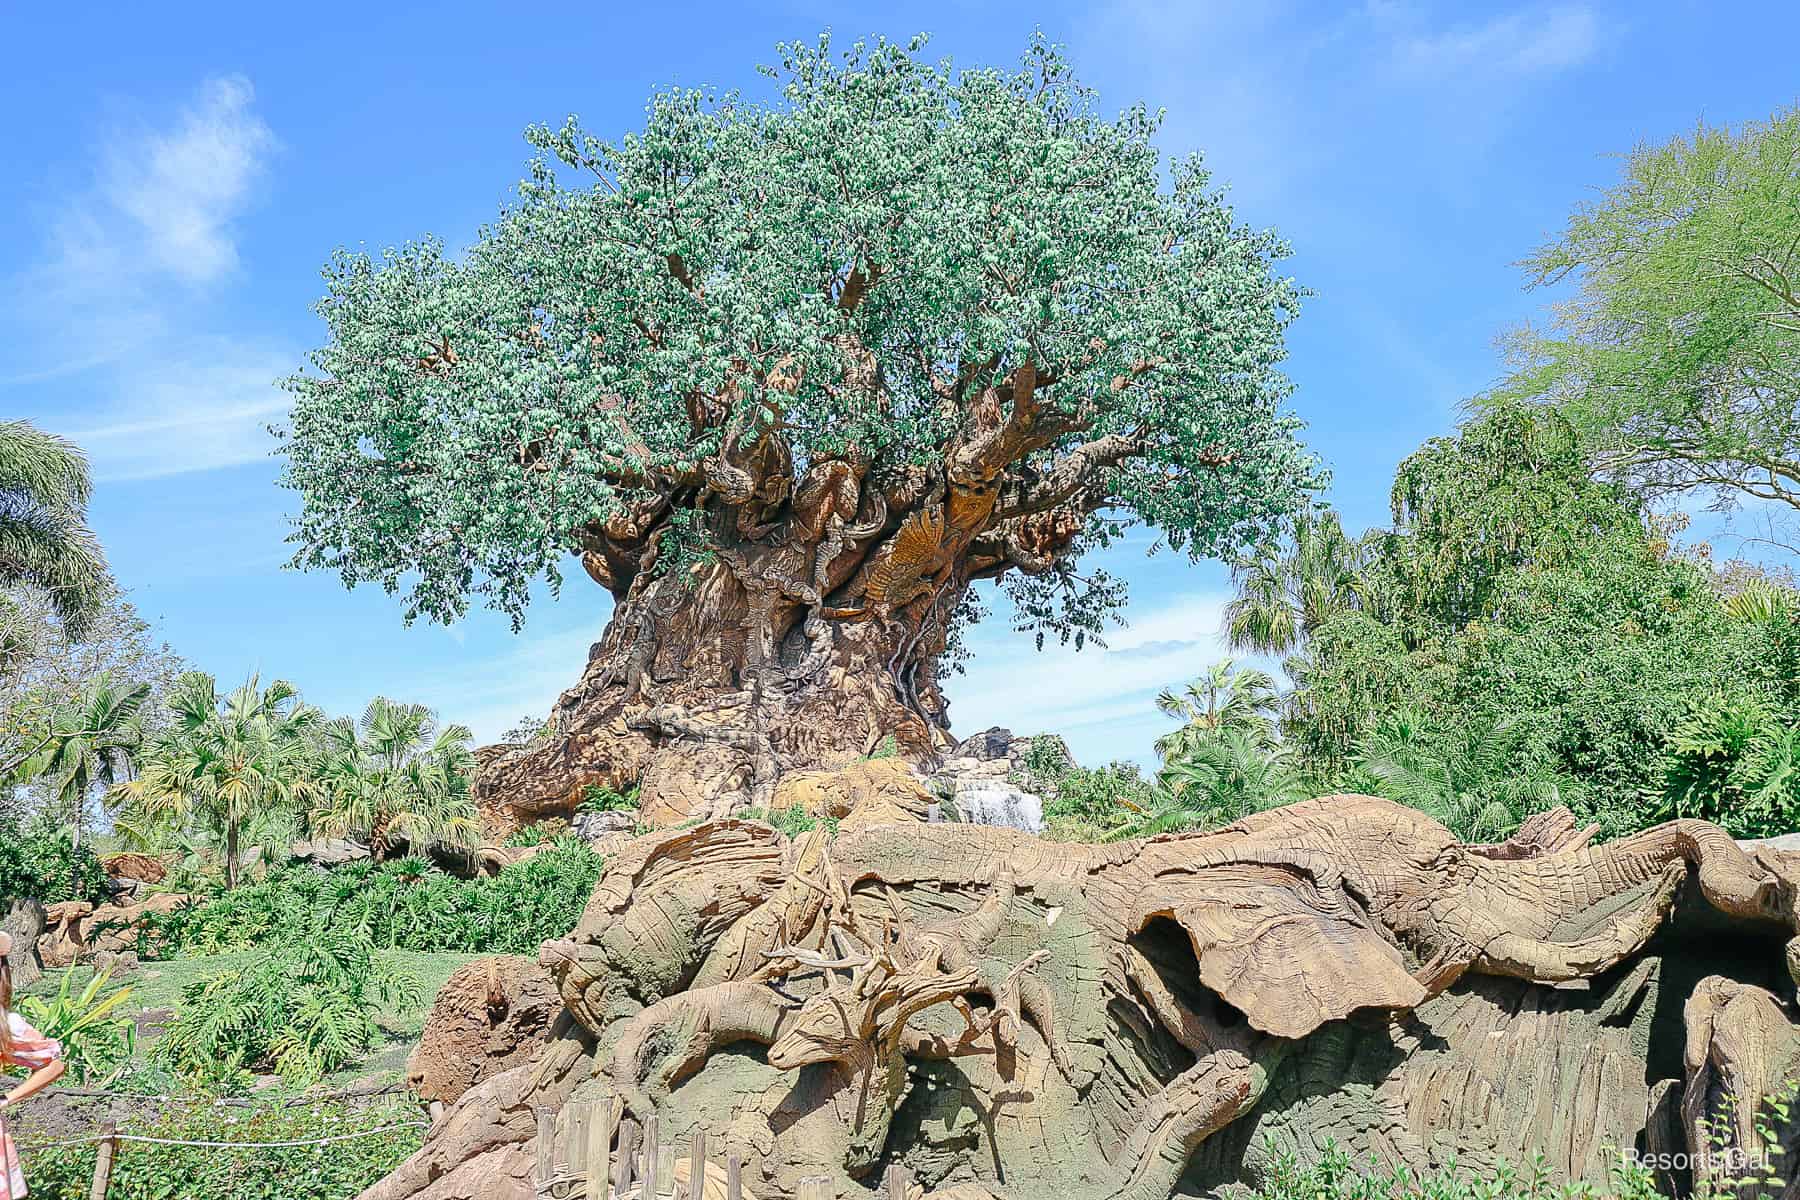 The Tree of Life at Disney’s Animal Kingdom (Photos and Things to Do)